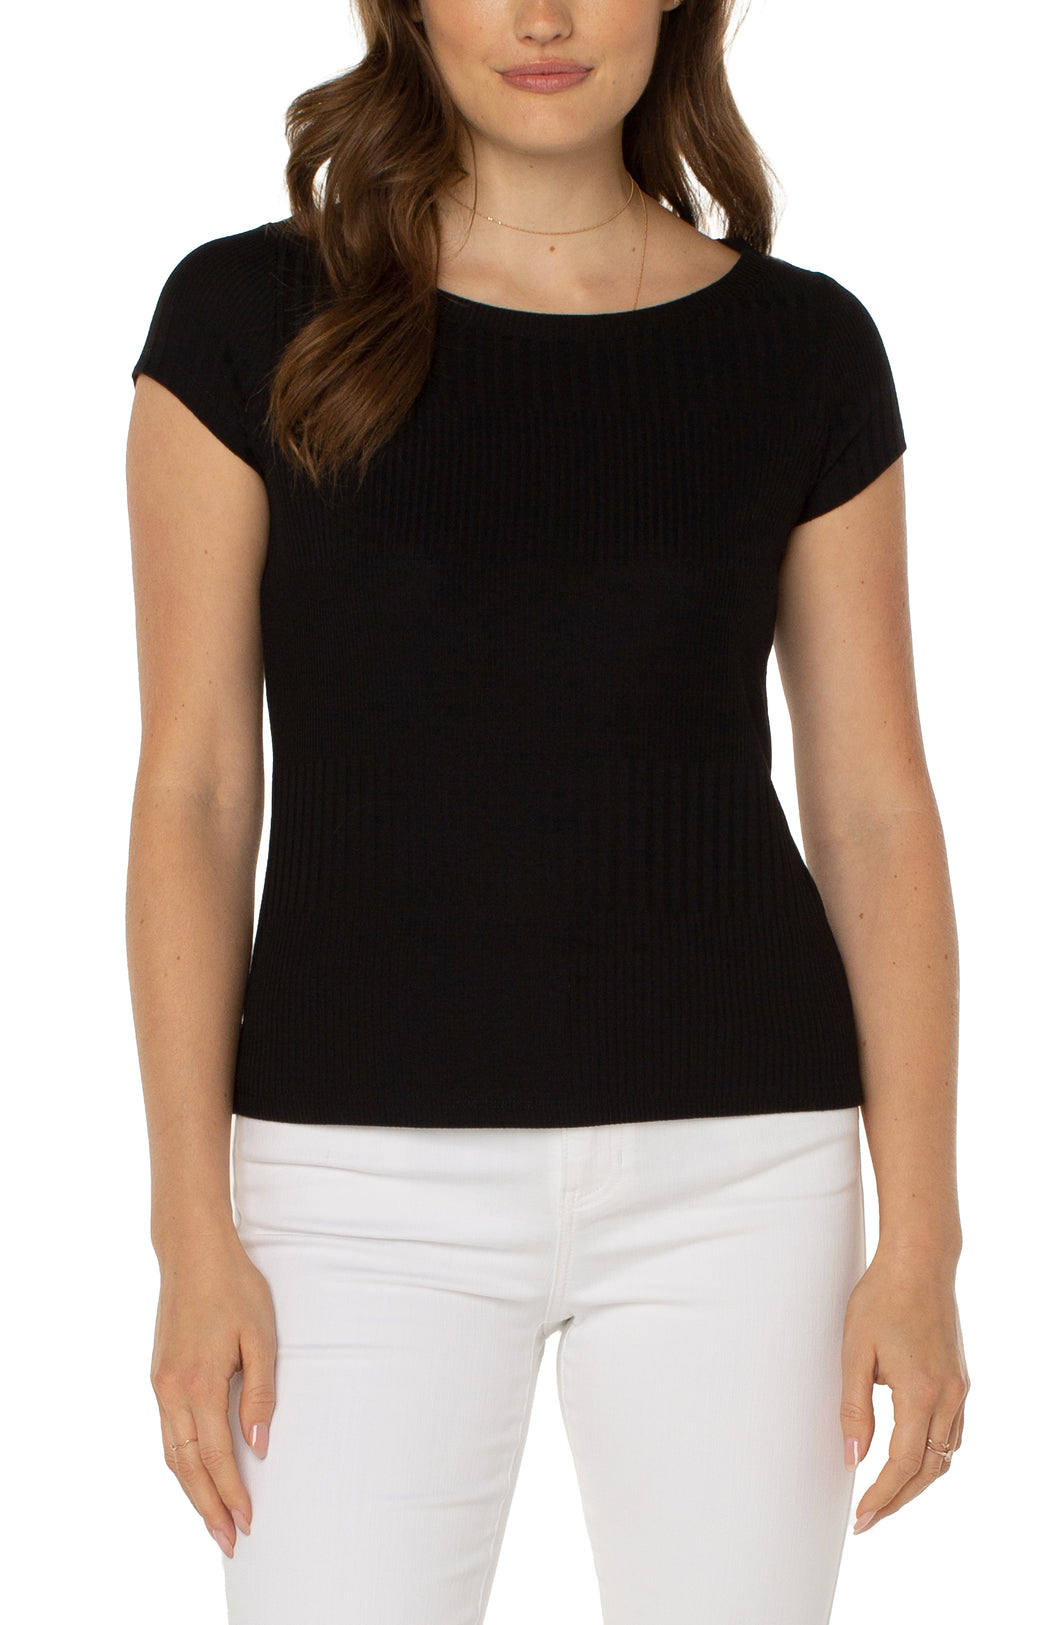 This is the perfect baby tee that your wardrobe has been waiting for! Textured to add interest, our Bailey in black essentially goes with every bottom, jacket, blazer in your closet. With its cap sleeves and boat neck, our Bailey tee is super comfortable and easy to wear.  Color- Black. Large and mini rib knit. Boat neck. Cap sleeve. Straight hem finish.